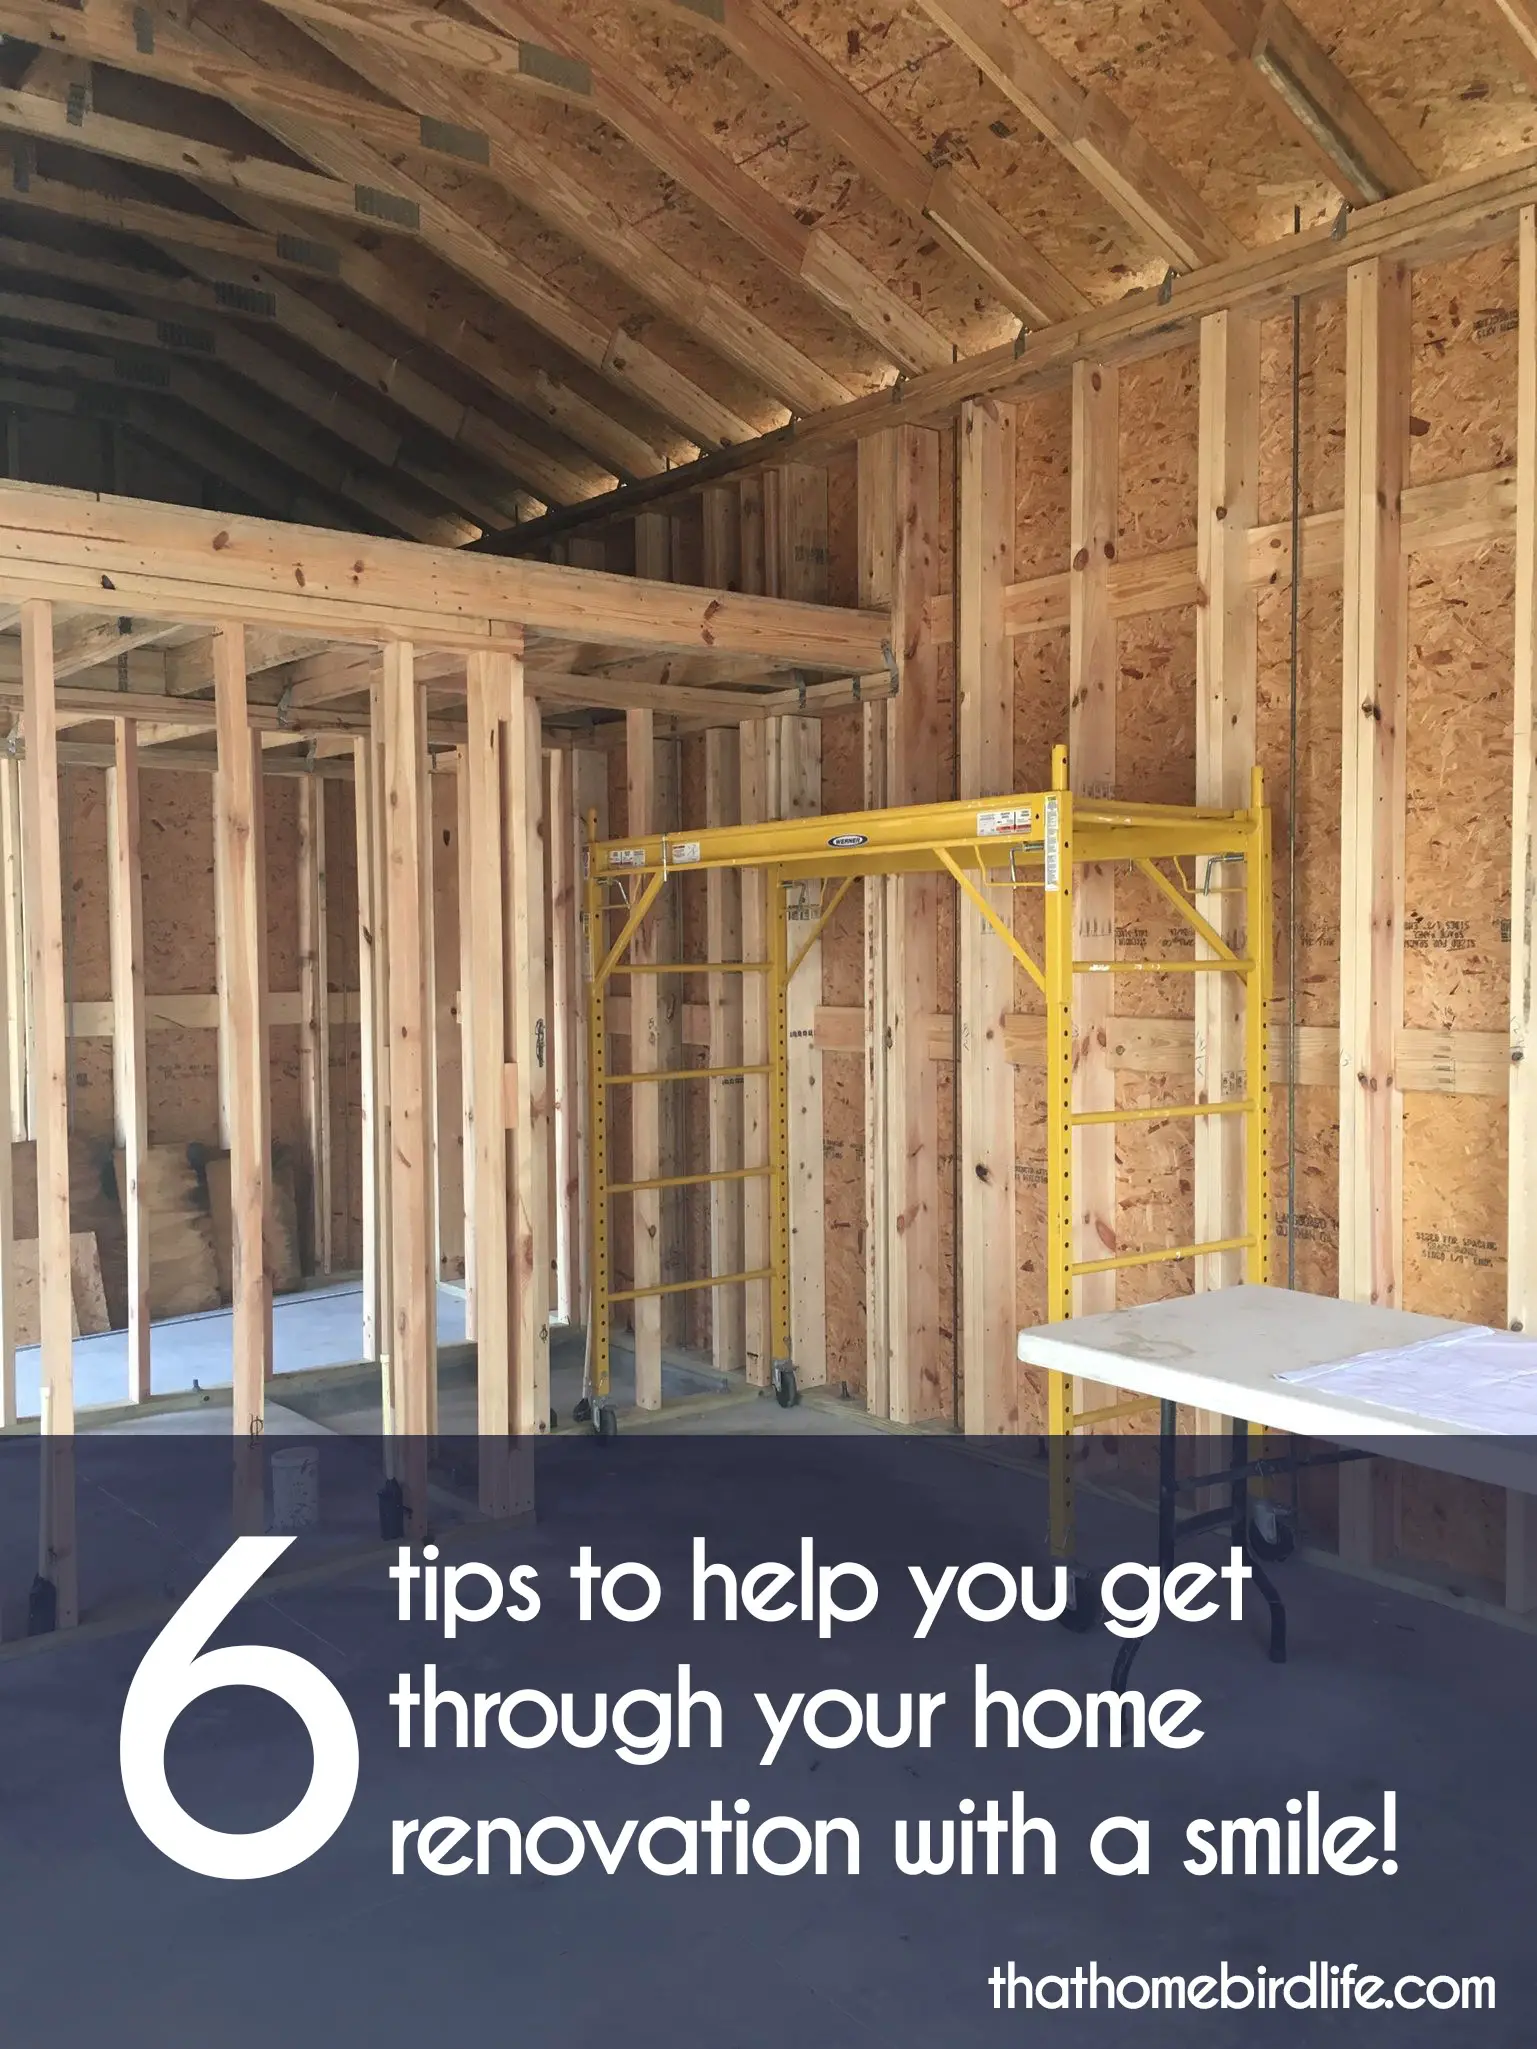 Six tips to help you get through your home renovation with a smile | That Homebird Life Blog